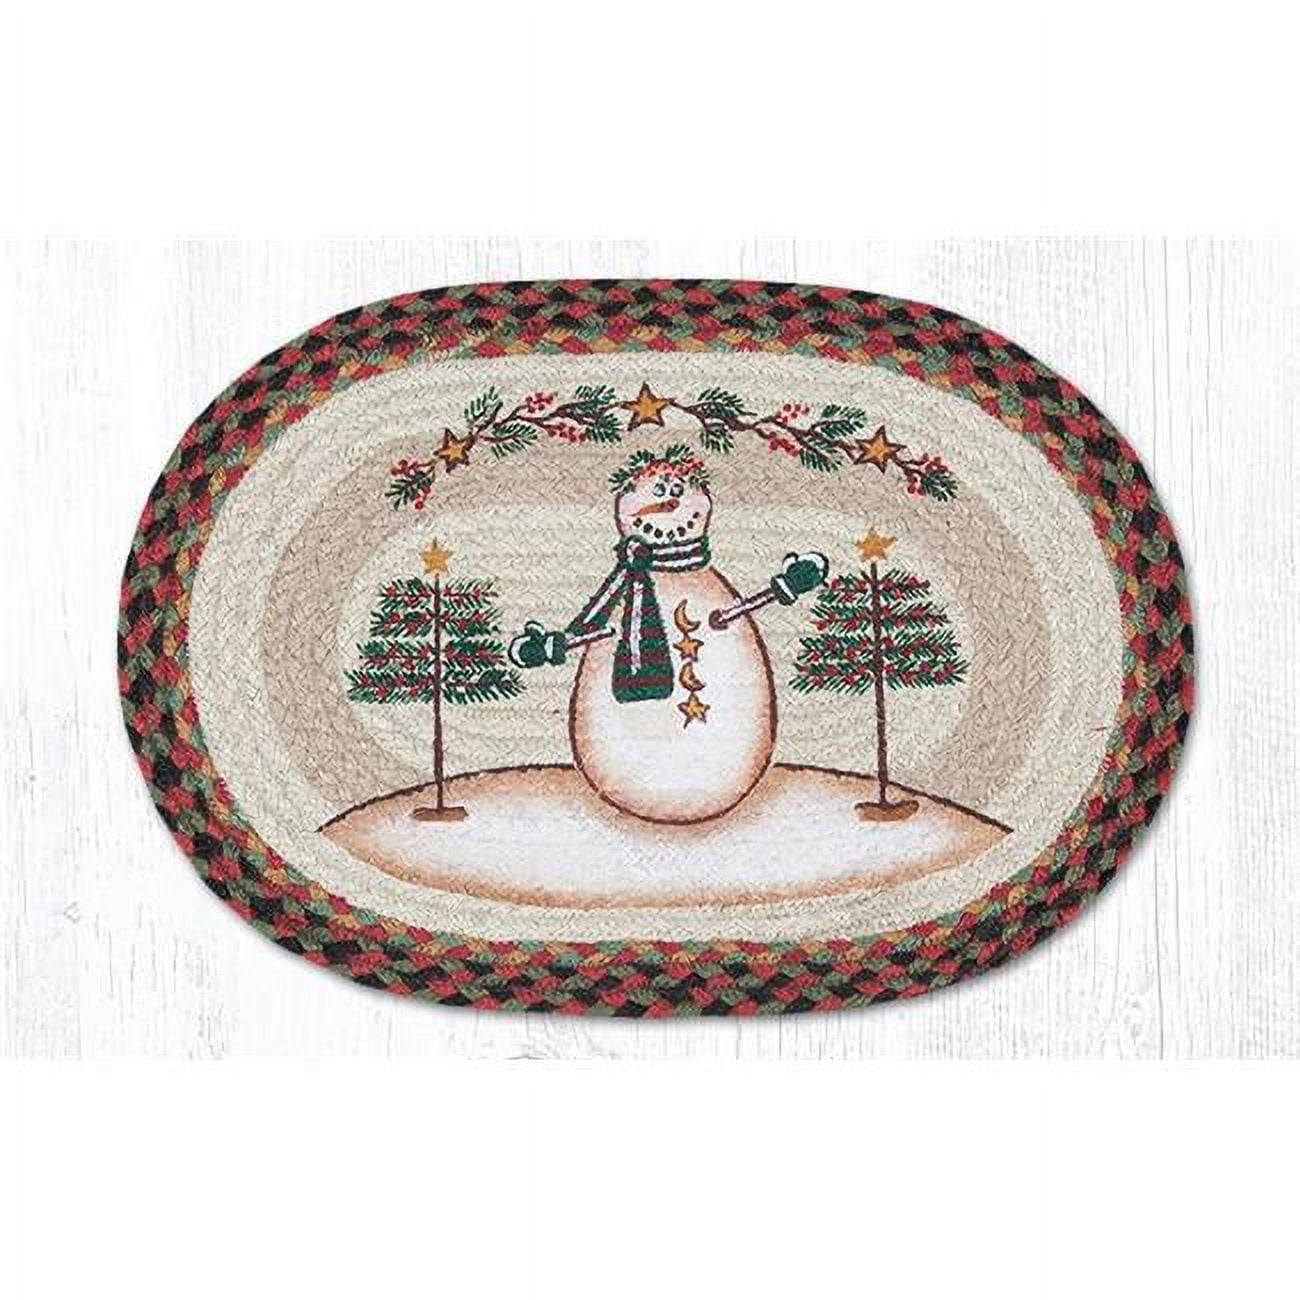 Picture of Capitol Importing 48-081MSS 13 x 19 in. Moon & Star Snowman Printed Oval Placemat